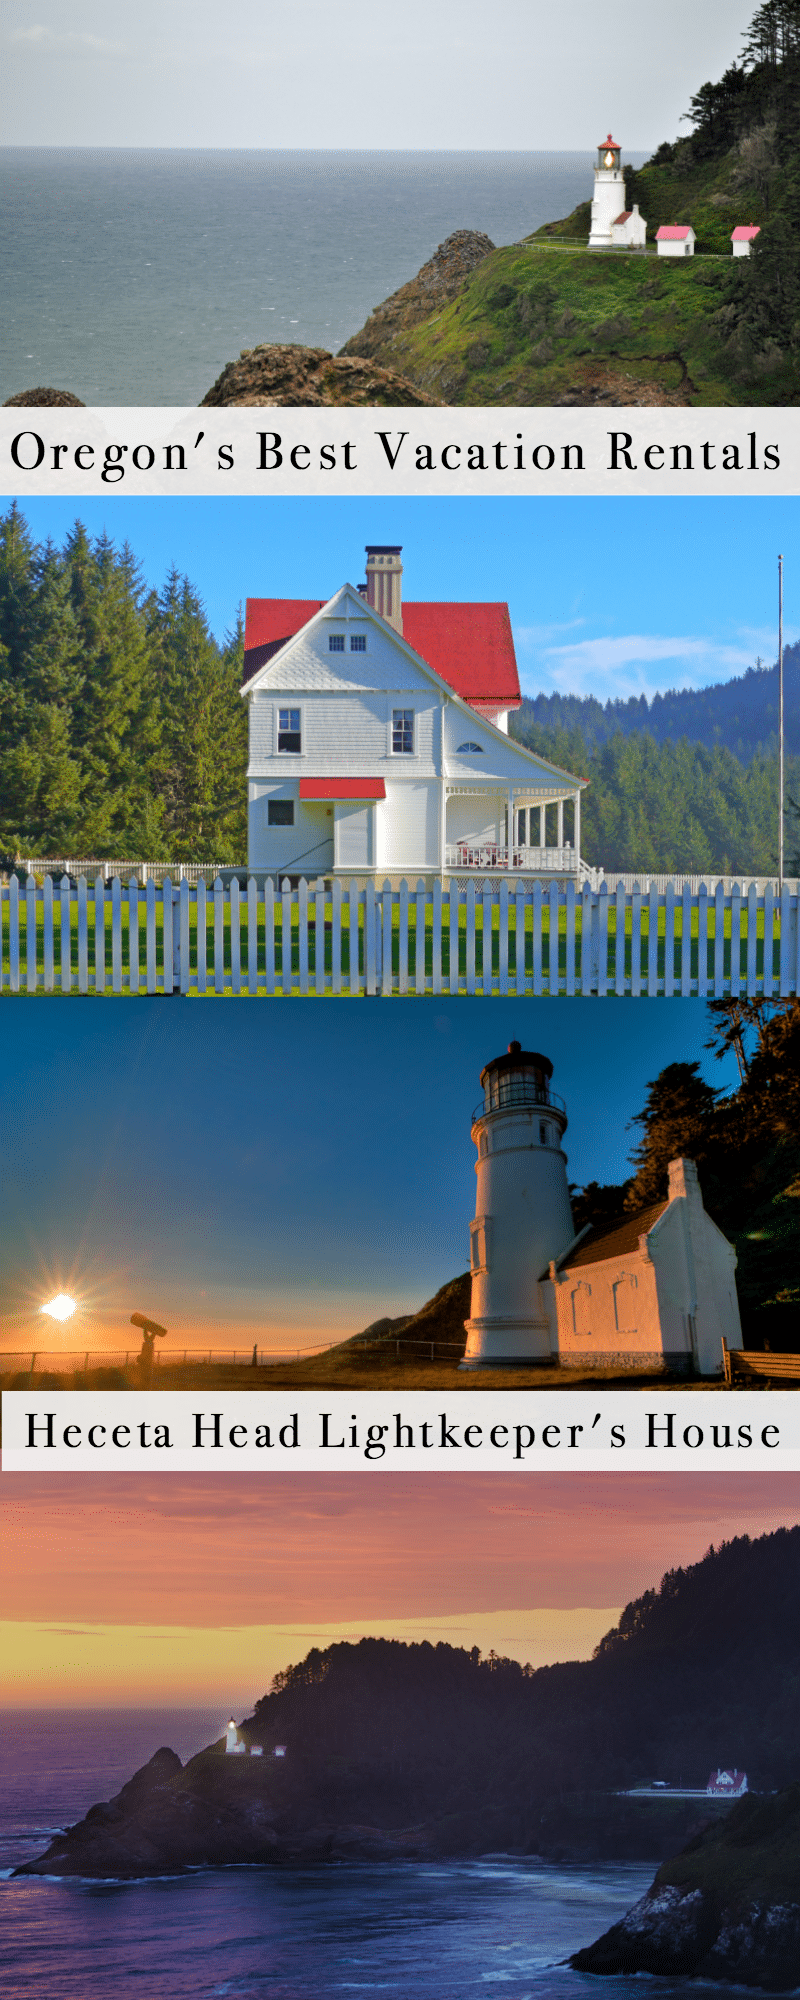 The Best Vacation Rentals in Oregon: Heceta Head Lighthouse